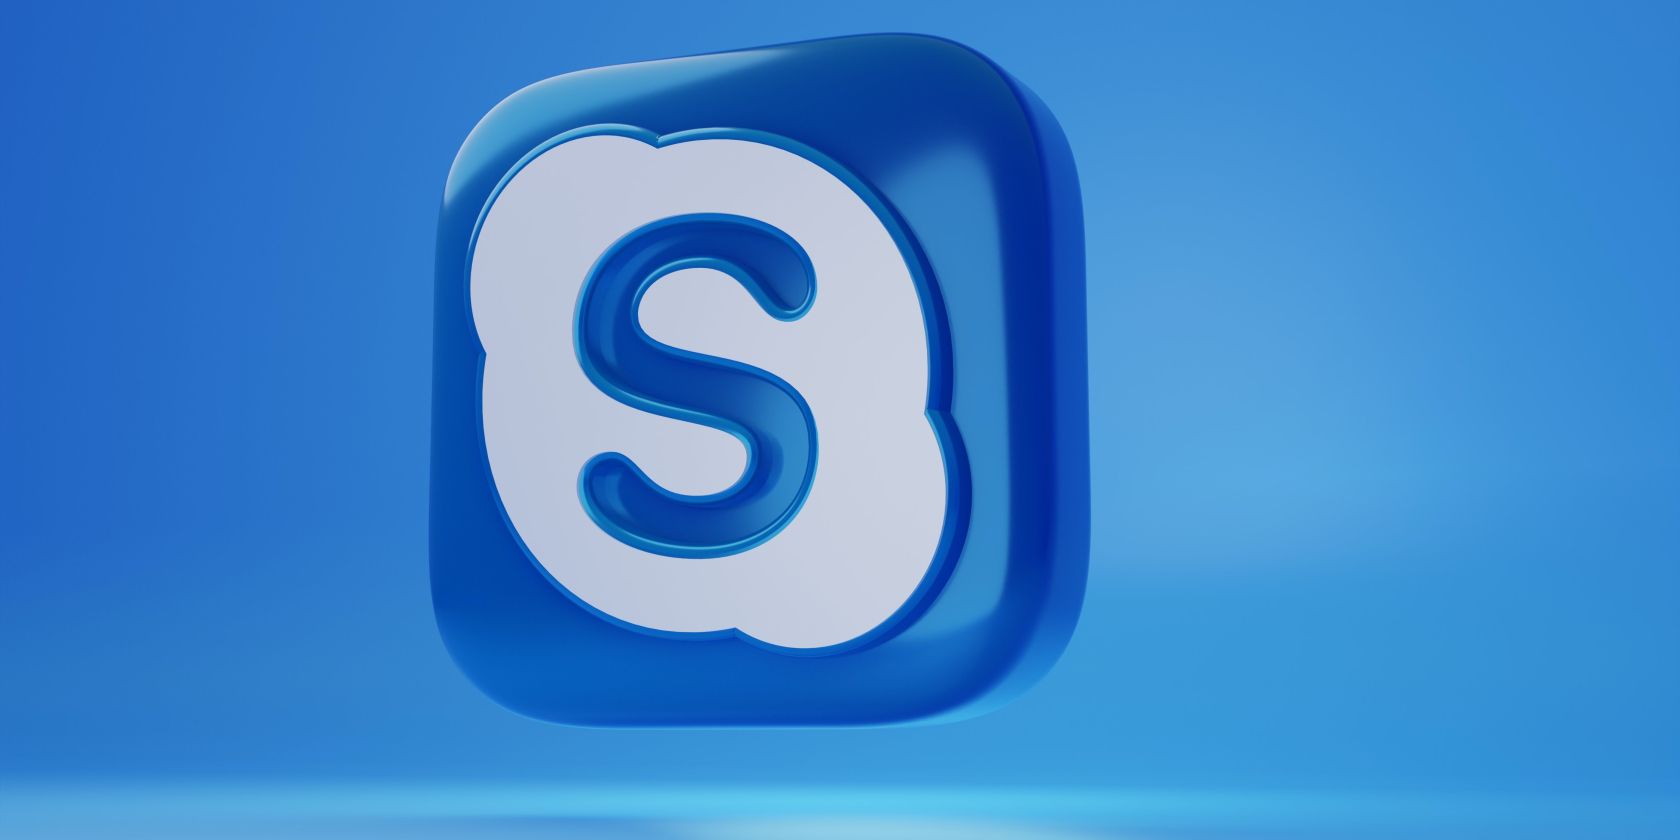 hoiw to add skype to startup applications in windows 10